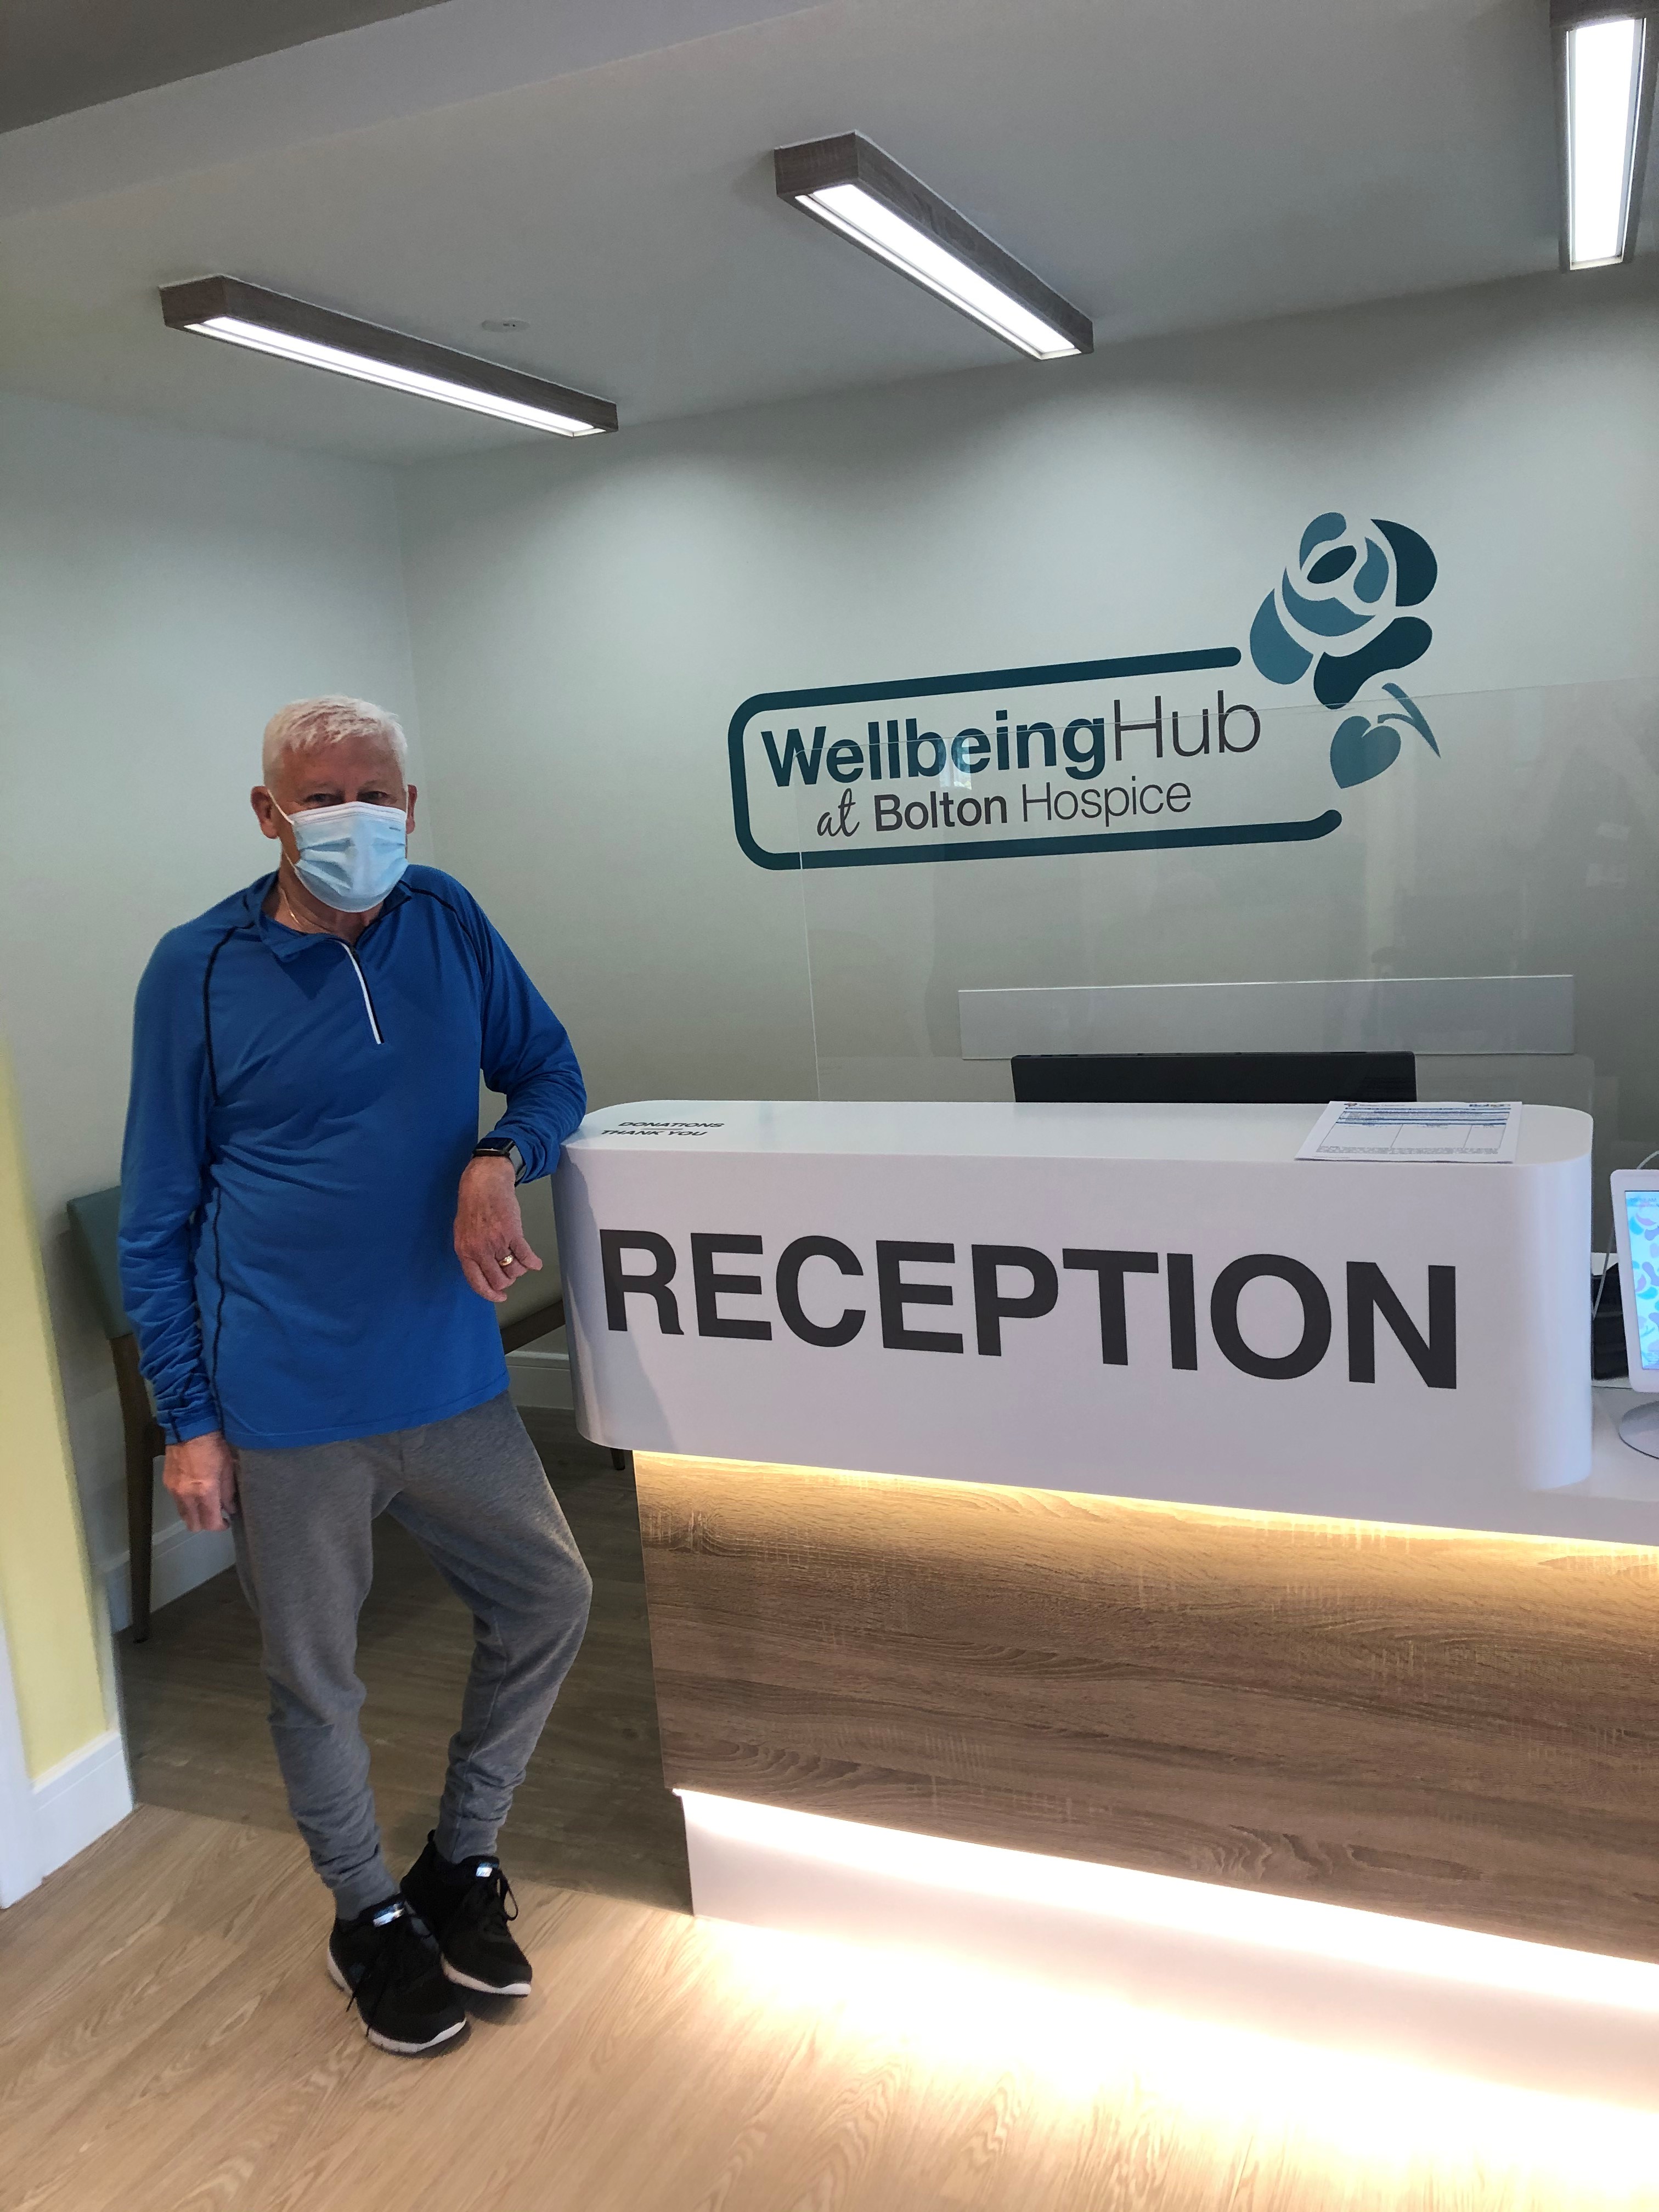 Patient stood at the reception desk of the Wellbeing Hub